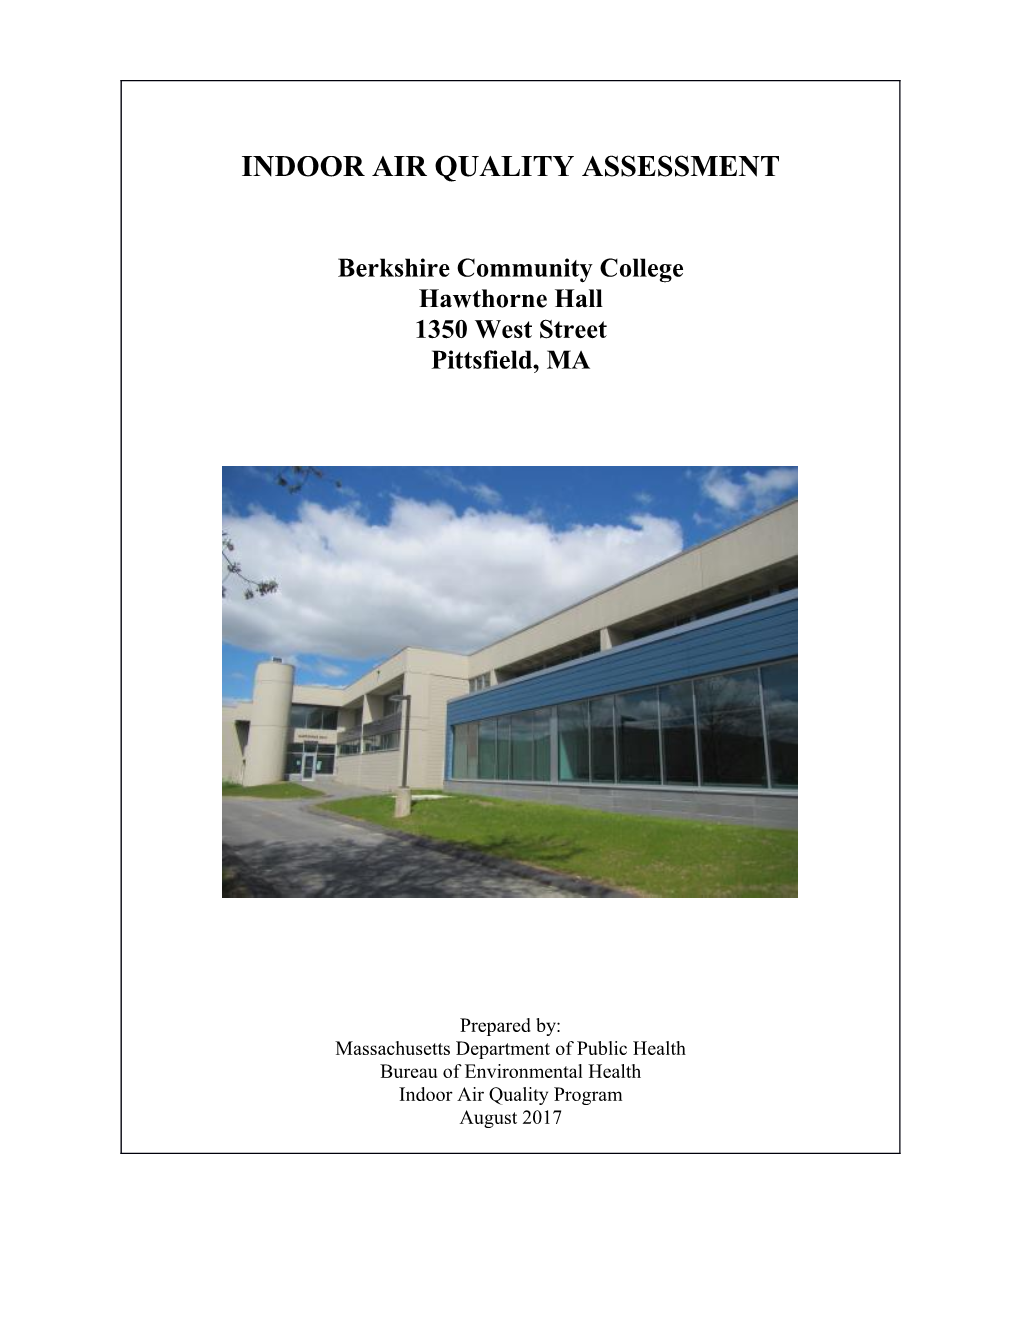 Indoor Air Quality Assessment: Berkshire Community College